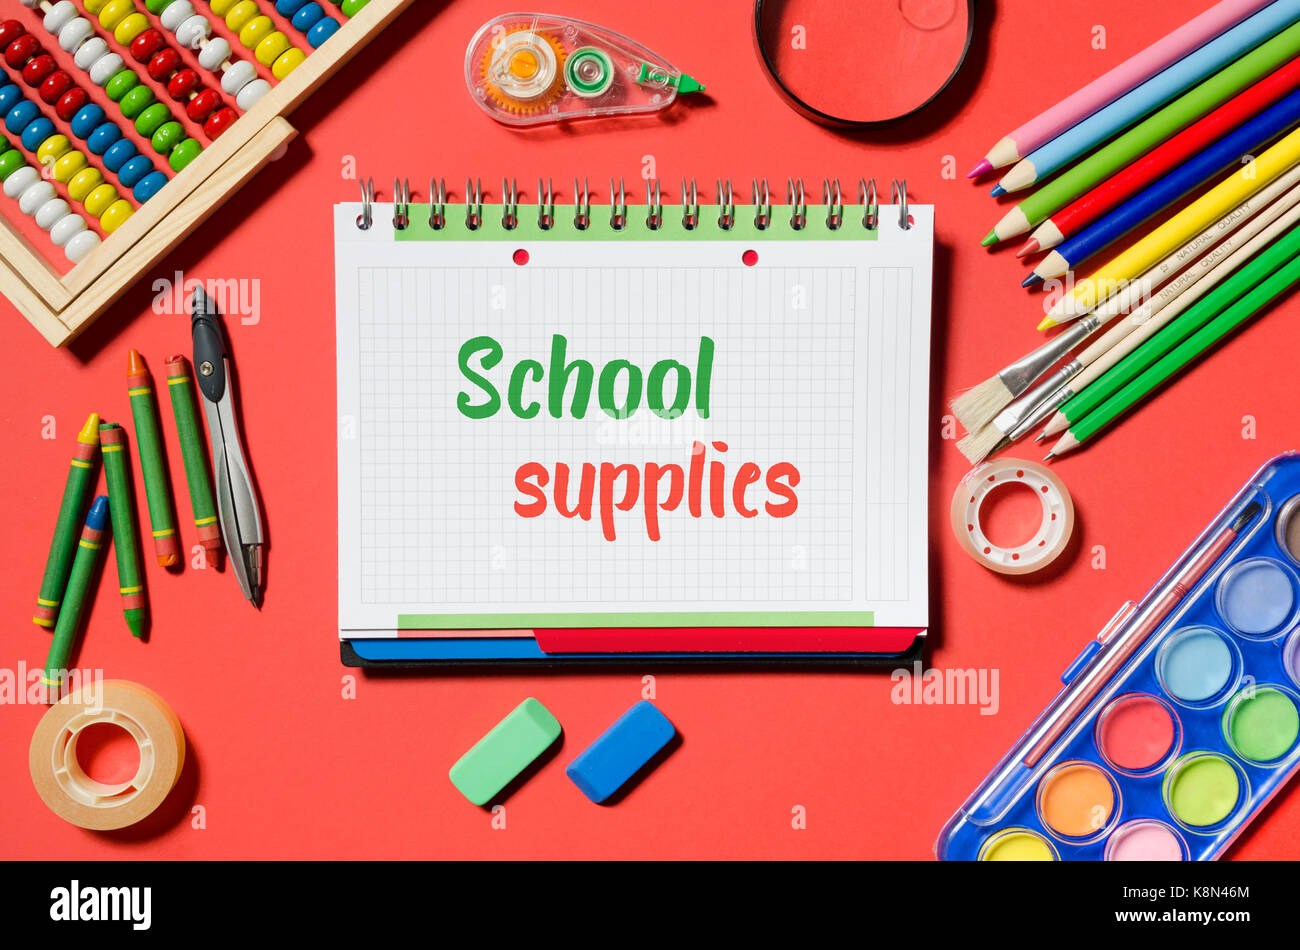 https://c8.alamy.com/comp/K8N46M/notepad-with-school-supplies-words-and-office-stationery-red-background-K8N46M.jpg